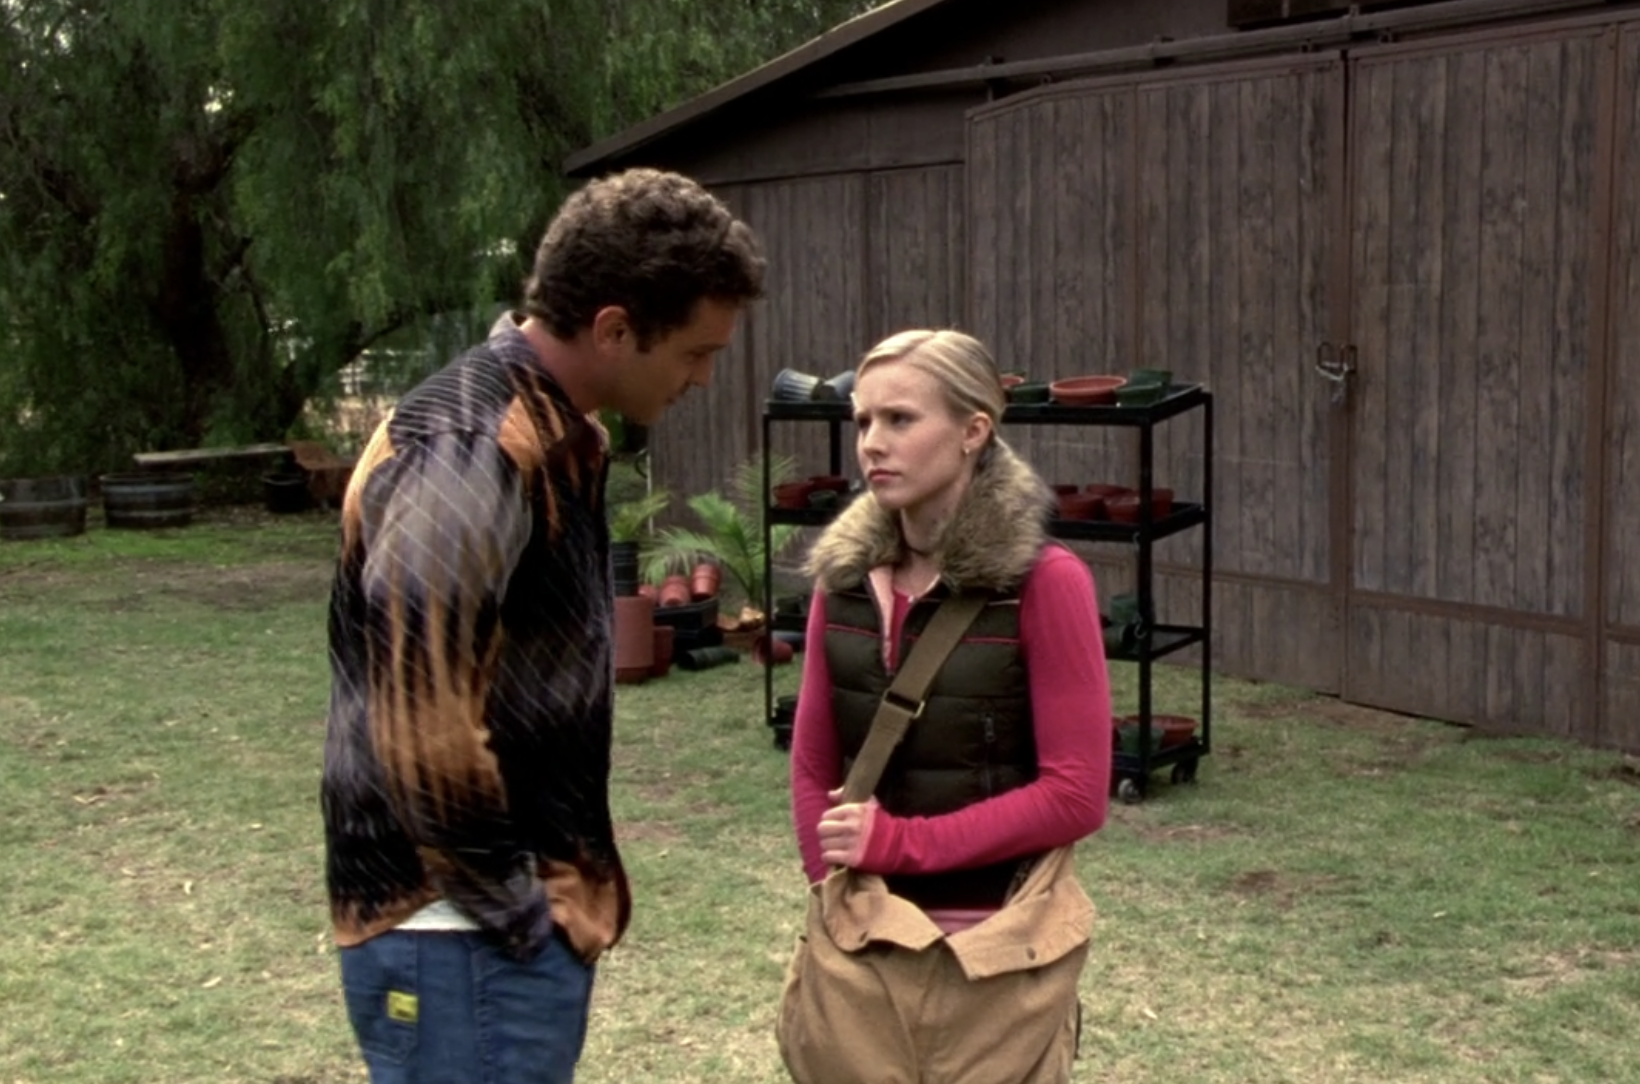 Screenshot from S1E9 of Veronica Mars. Josh and Veronica stand at the farm. Josh is wearing an orange and gray buttondown shirt. He is standing close to Veronica and his head is bent towards her while he explains something. Veronica looks up at him in skepticisim, one hand in her shoulder bag. She his wearing a longsleeved pink shirt and brown vest with a fur collar.